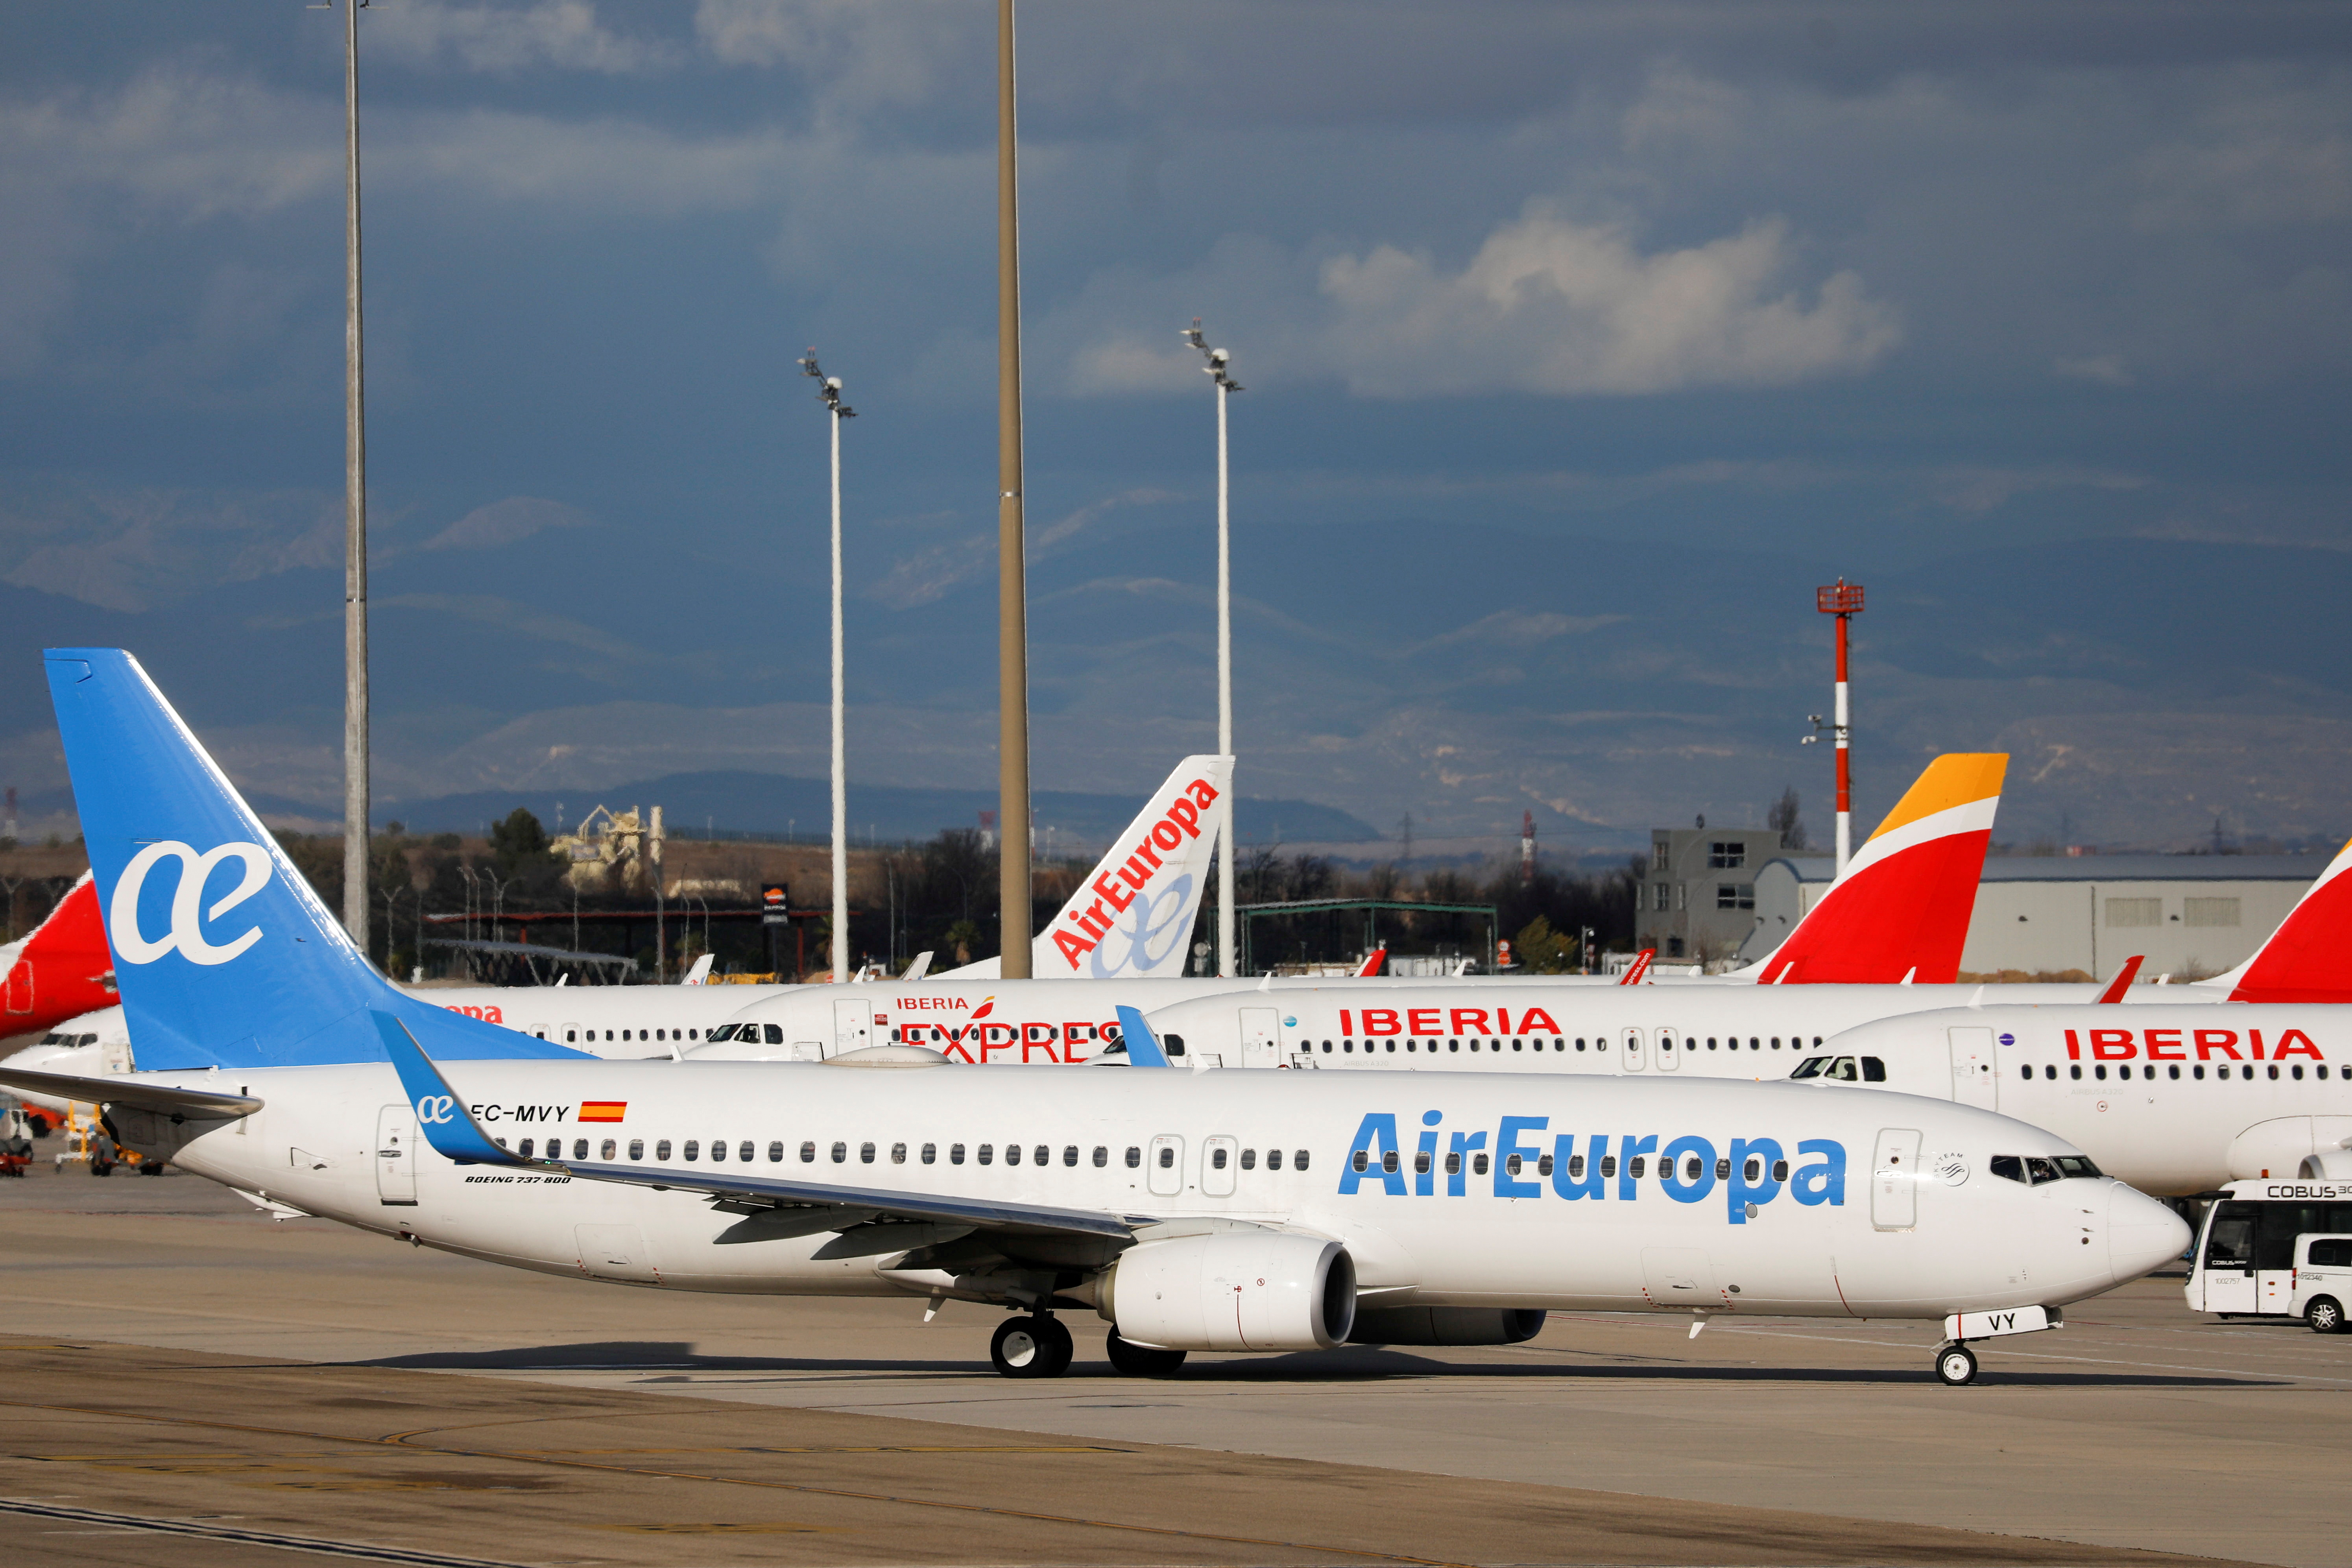 Iberia and Air Europa planes parked at Adolfo Suarez Barajas airport during the COVID-19 pandemic in Madrid, Spain, December 15, 2020. REUTERS/Susana Vera